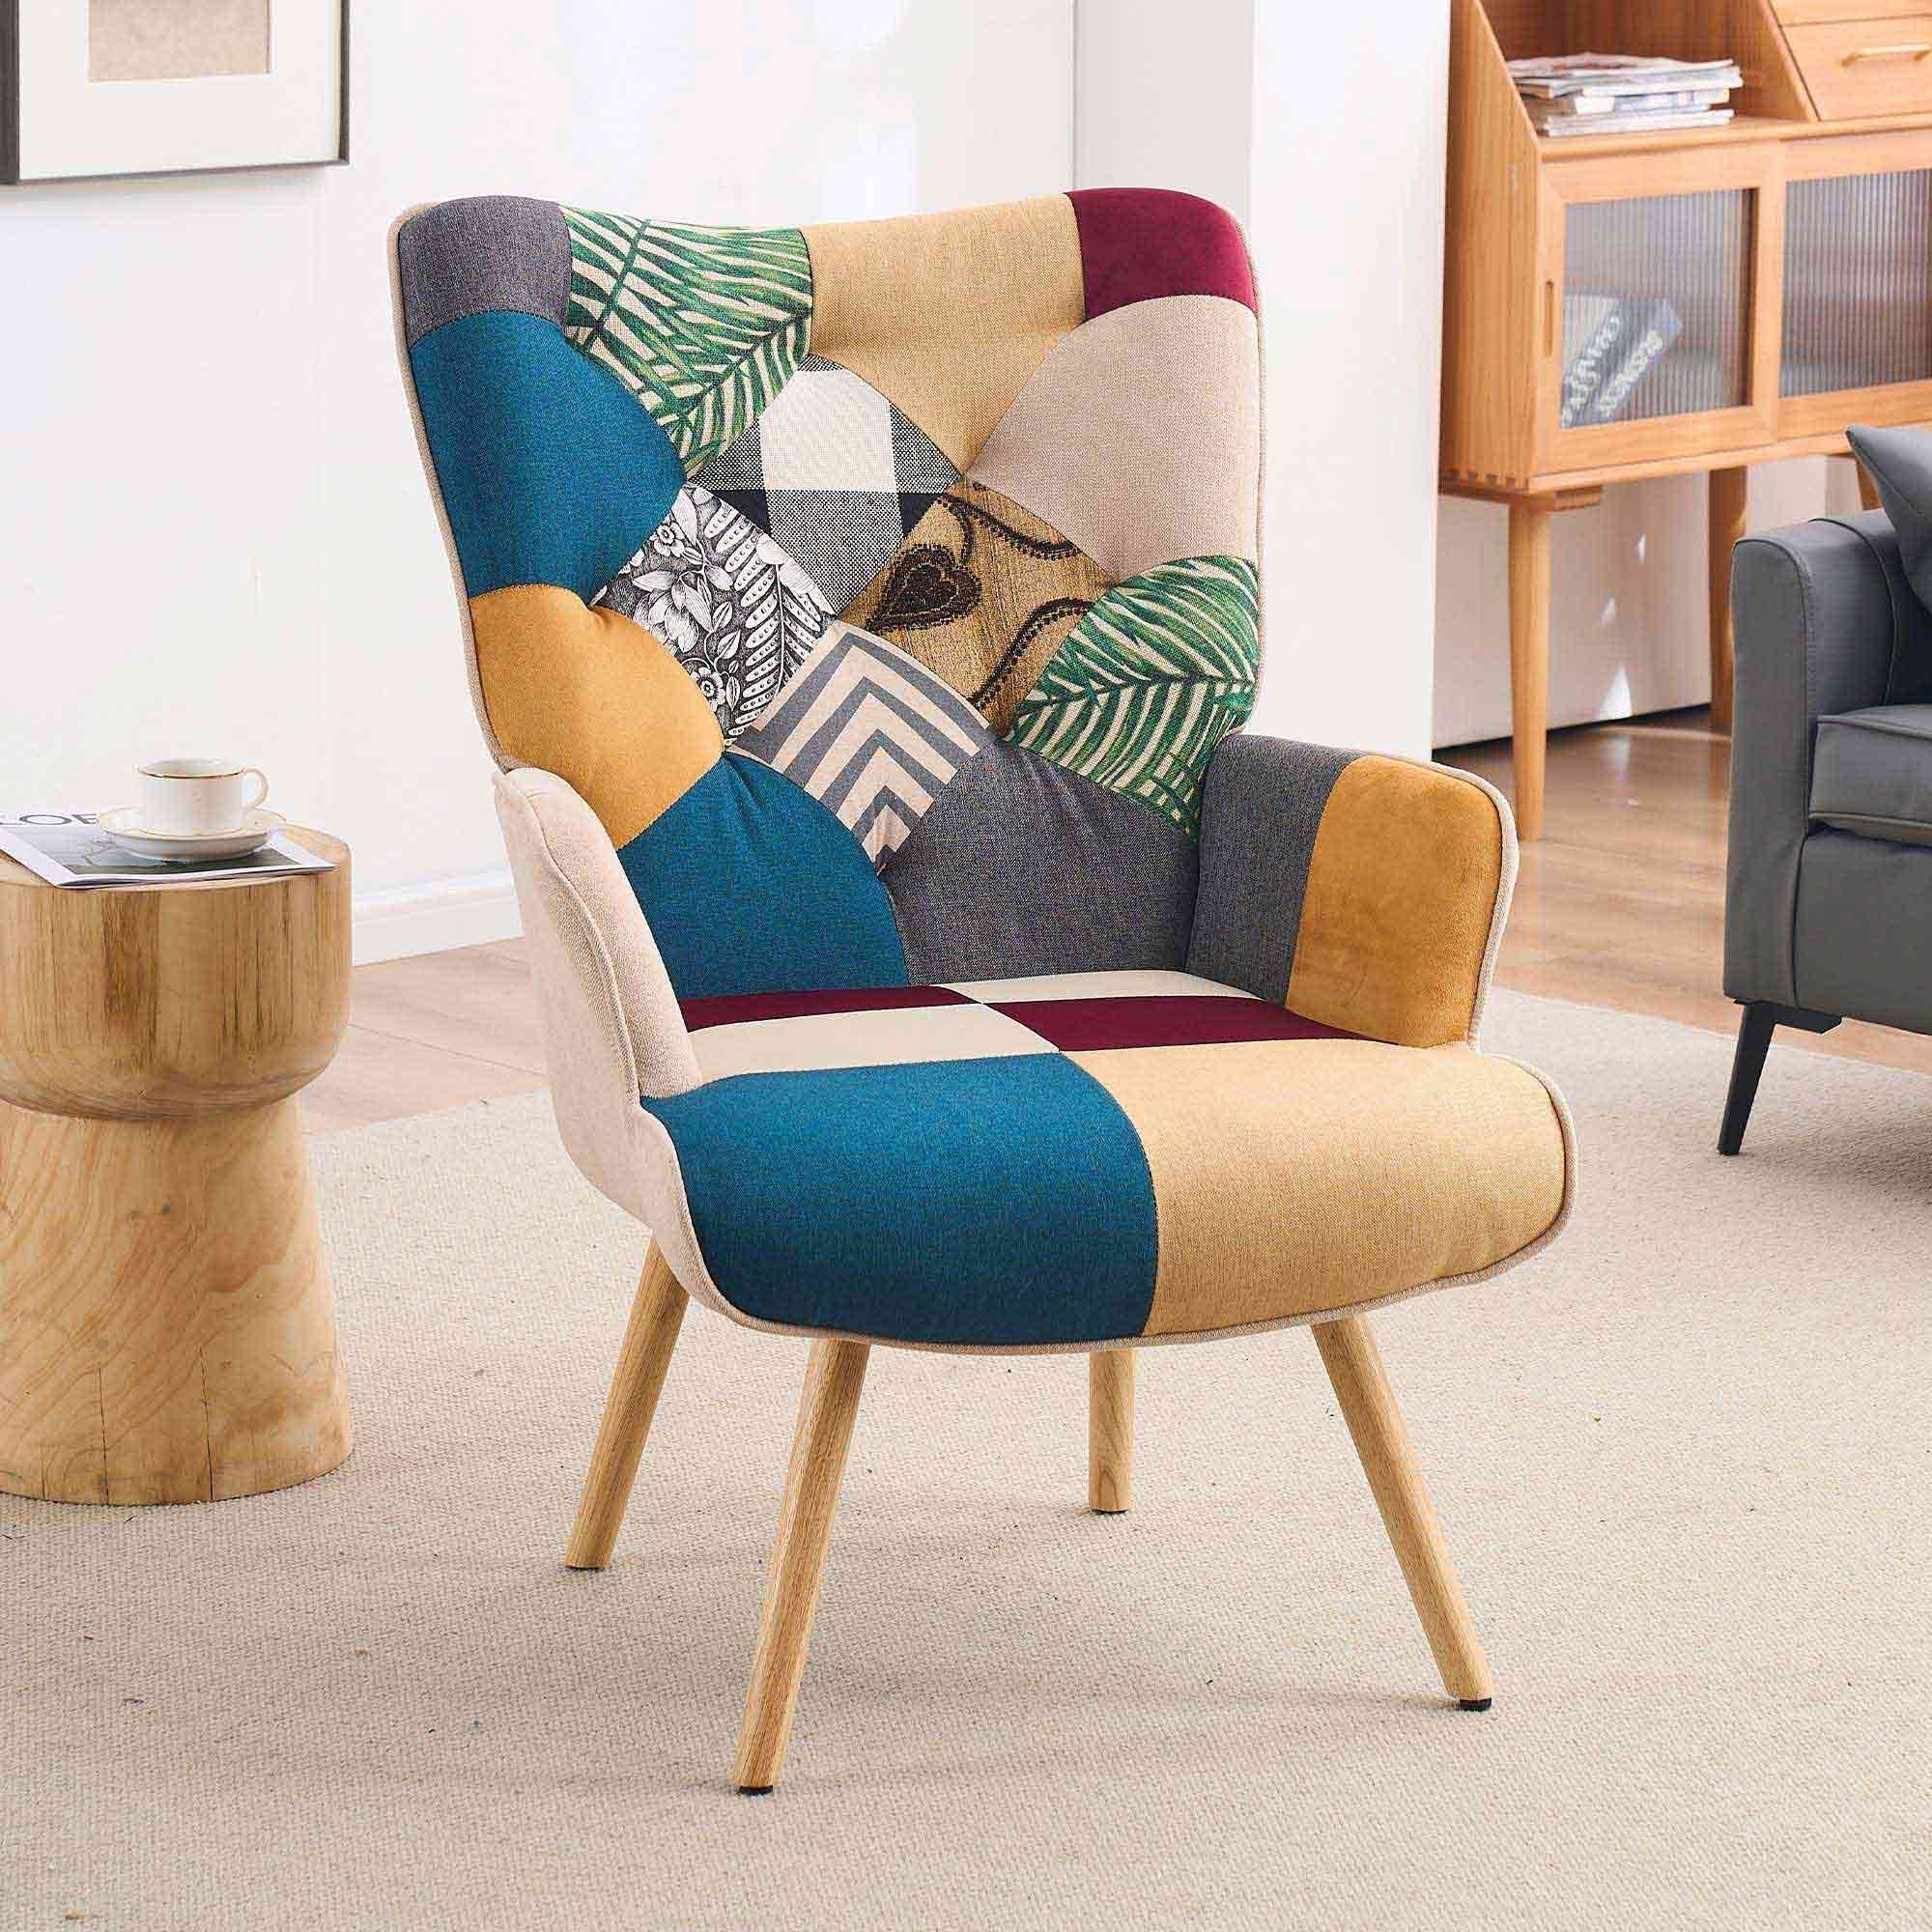 Multi-Colored Patchwork Wingback Accent Chair With Solid Wood Legs, Linen Fabric Napping Armchair For Living Room - Colorful